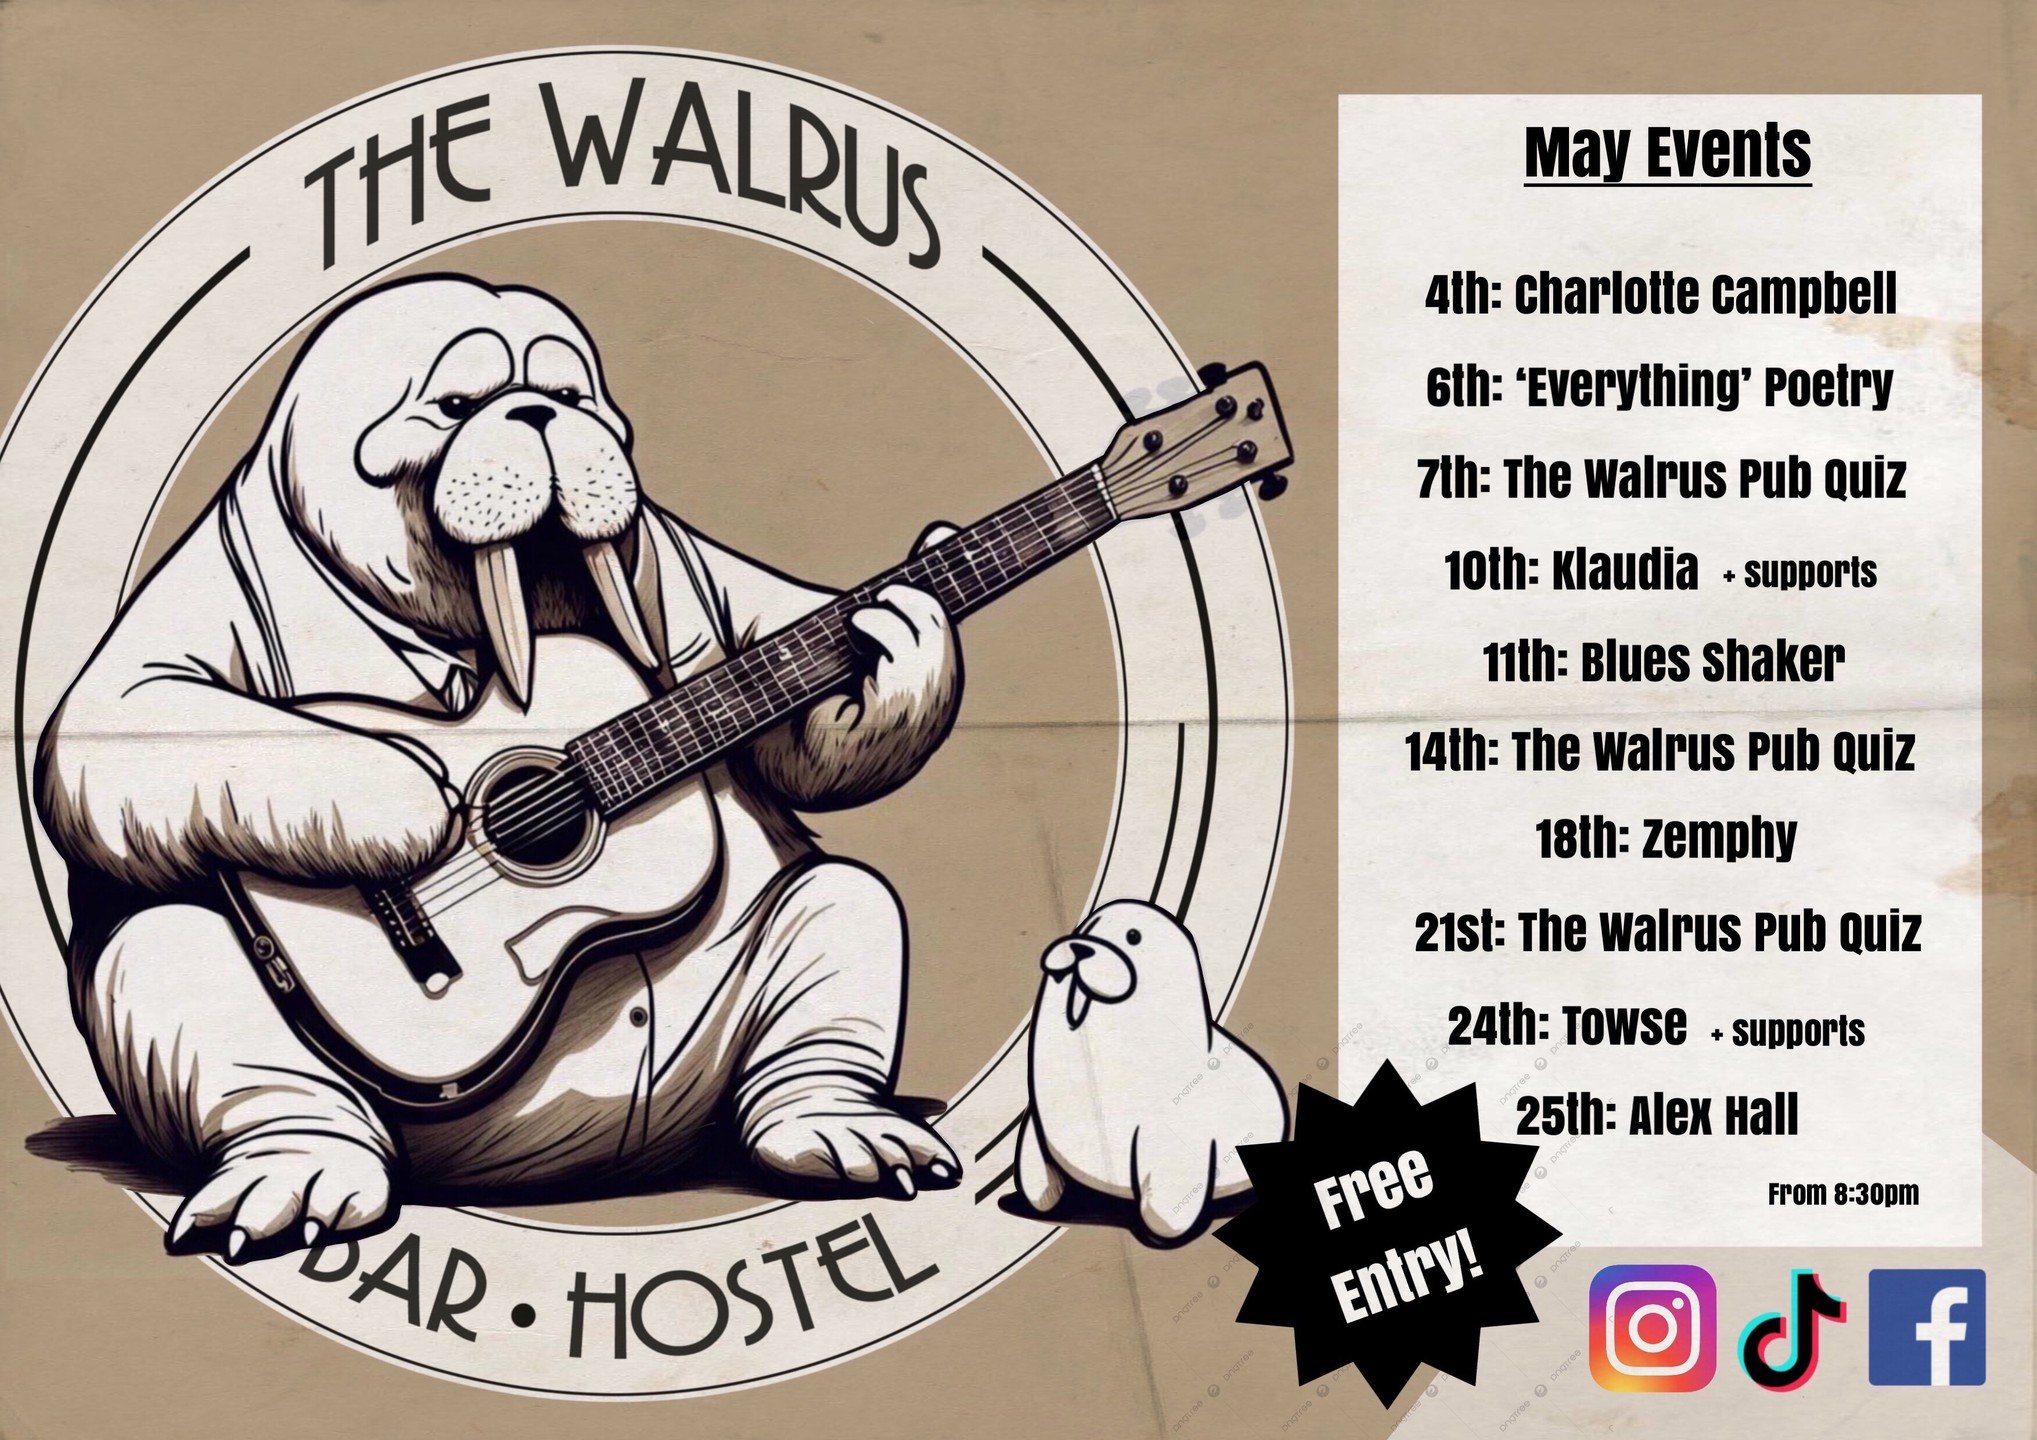 Live original artists, cover acts, poetry &amp; pub quiz! 
We're even starting our own free walking tour this month so make sure you join us or you'll miss out on the fun. 😊